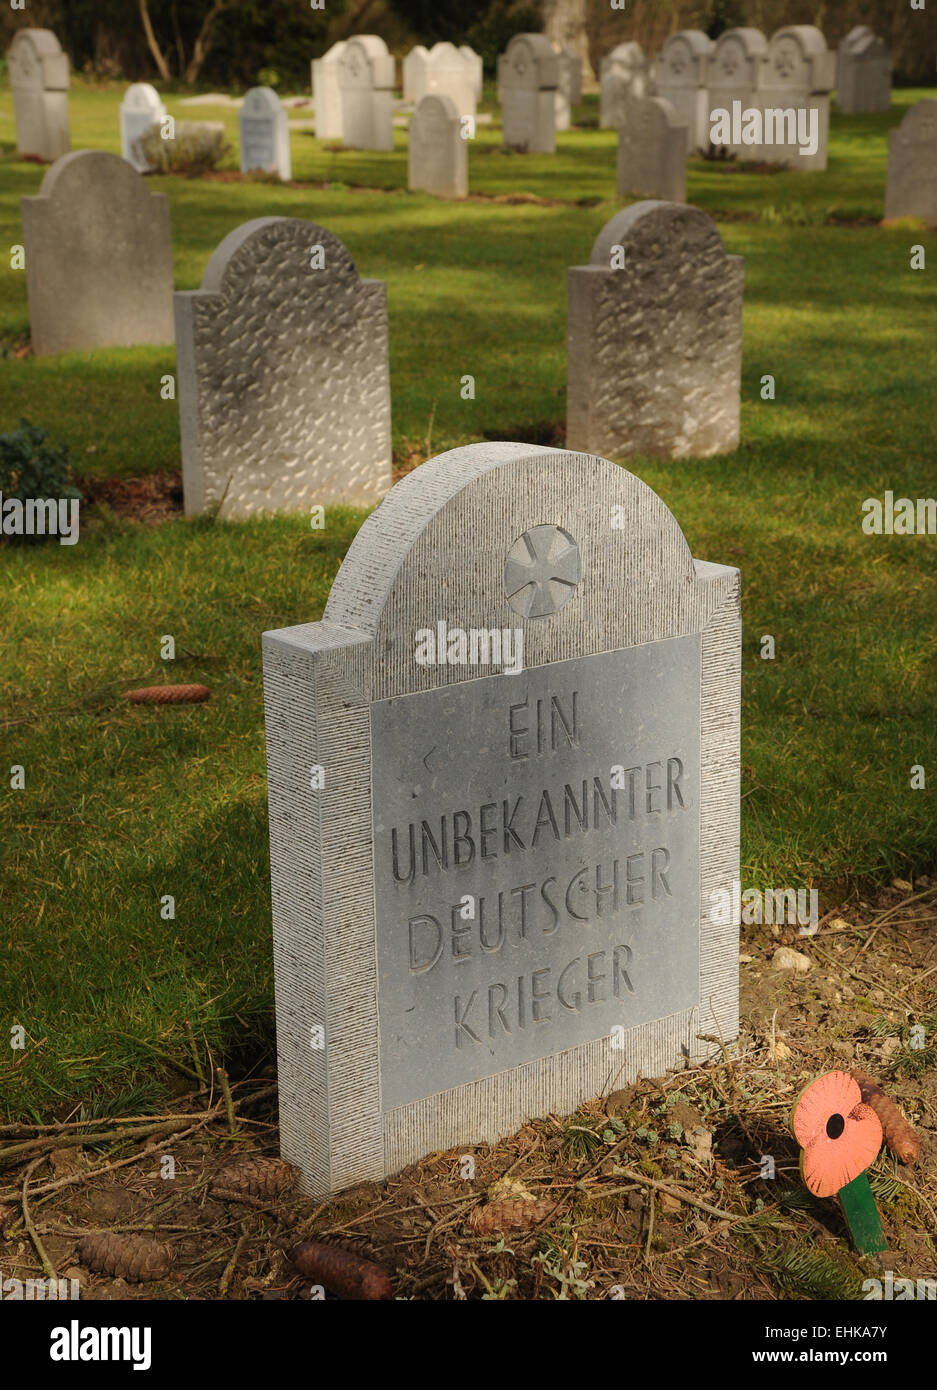 The stone marking the grave on one of the many thousands of unknown German warriors who fell during the Great War WW1. Stock Photo